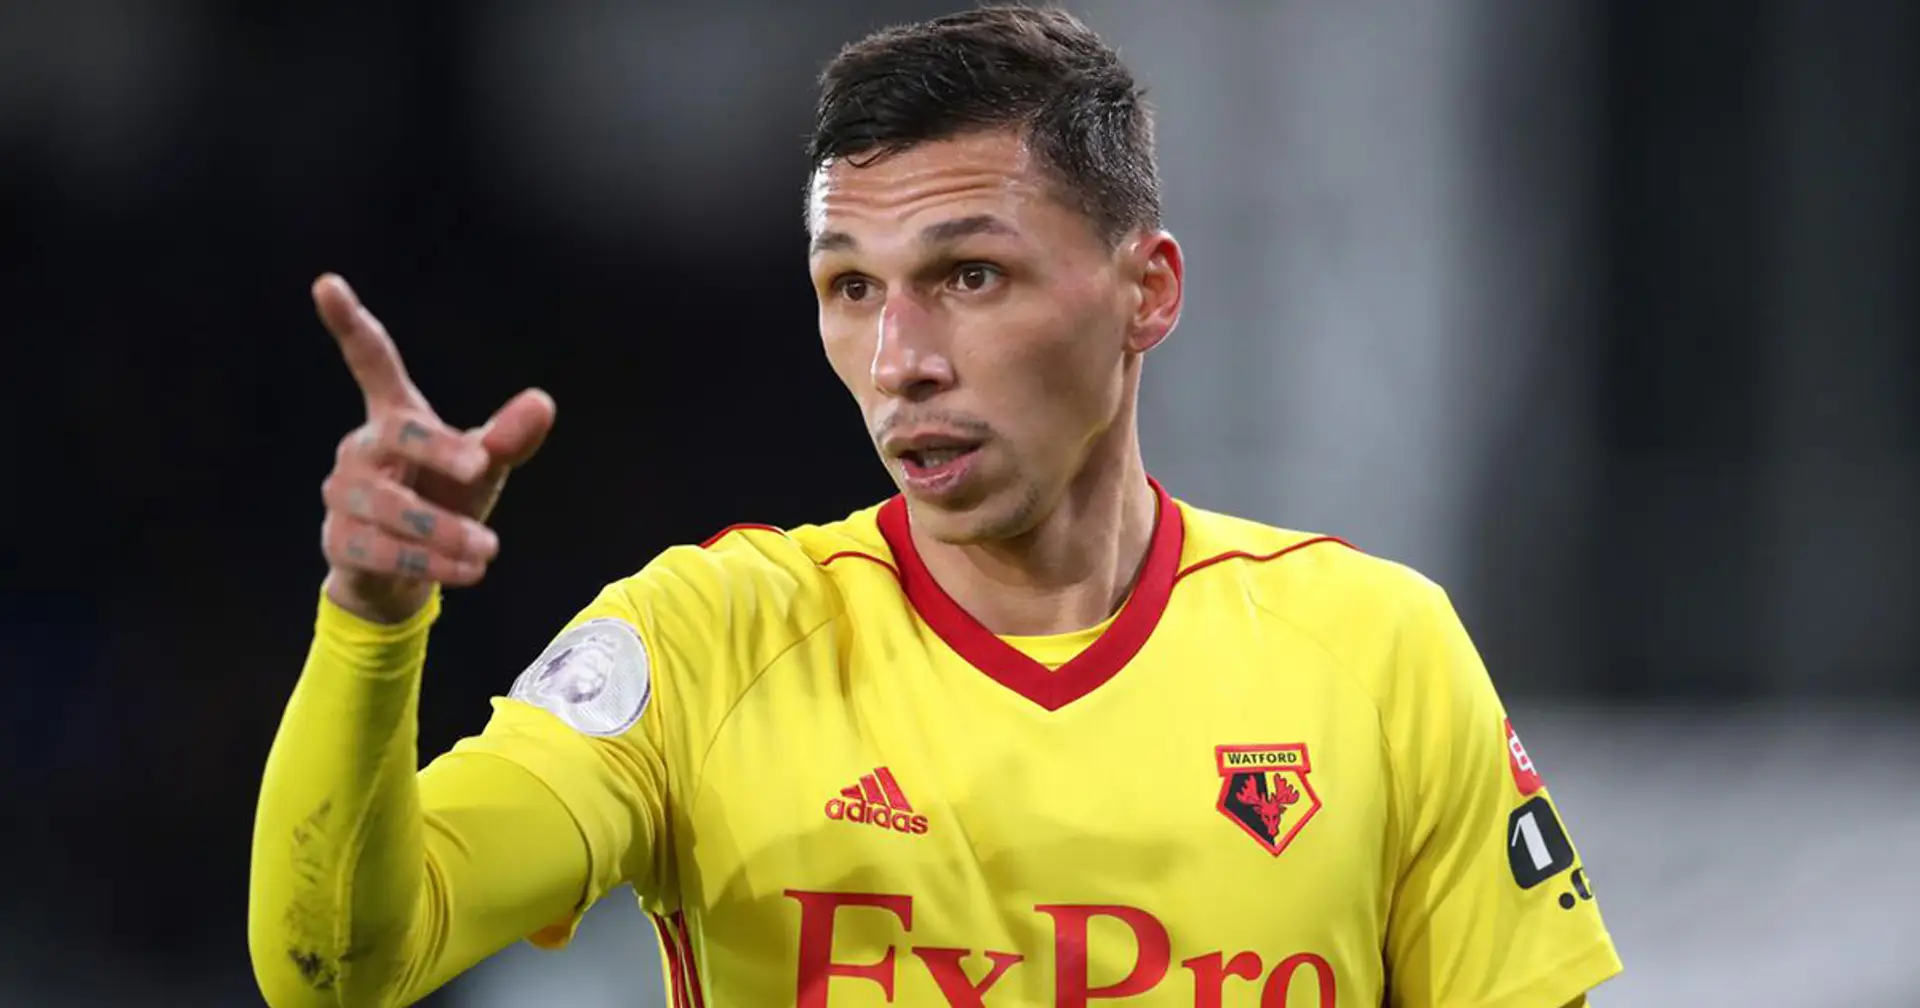 Watford defender Holebas calls for season to be ended but wants Liverpool to be crowned champions